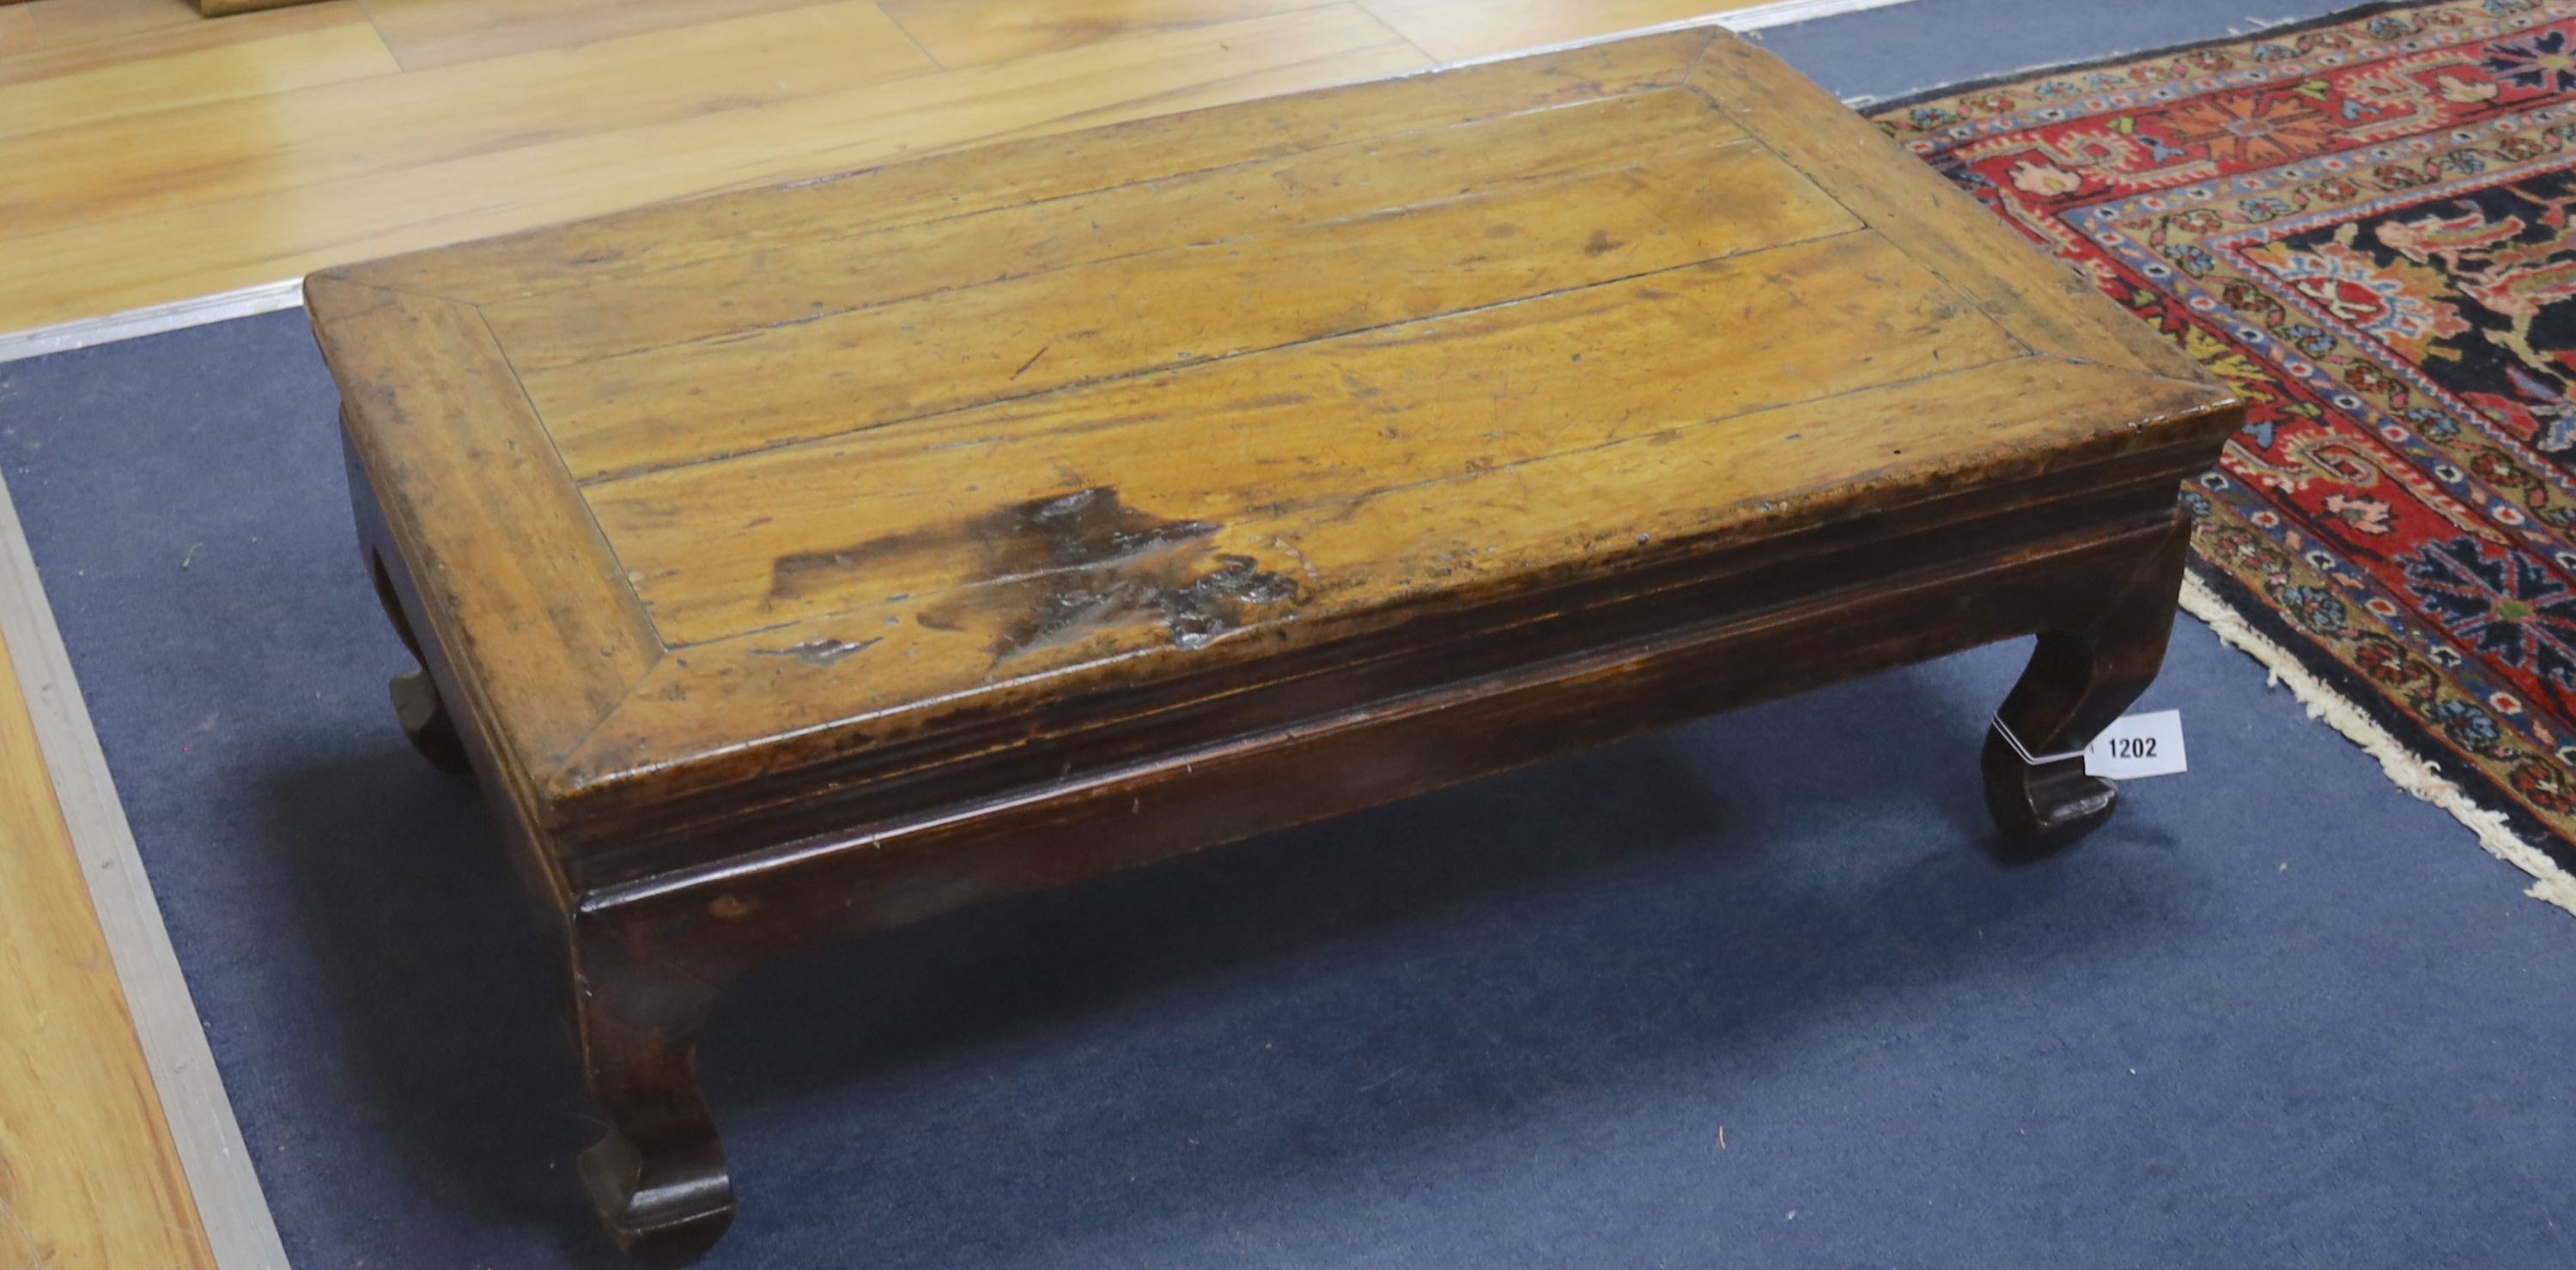 A 19th century Chinese wood Kang table, width 78cm, depth 46cm, height 27cm